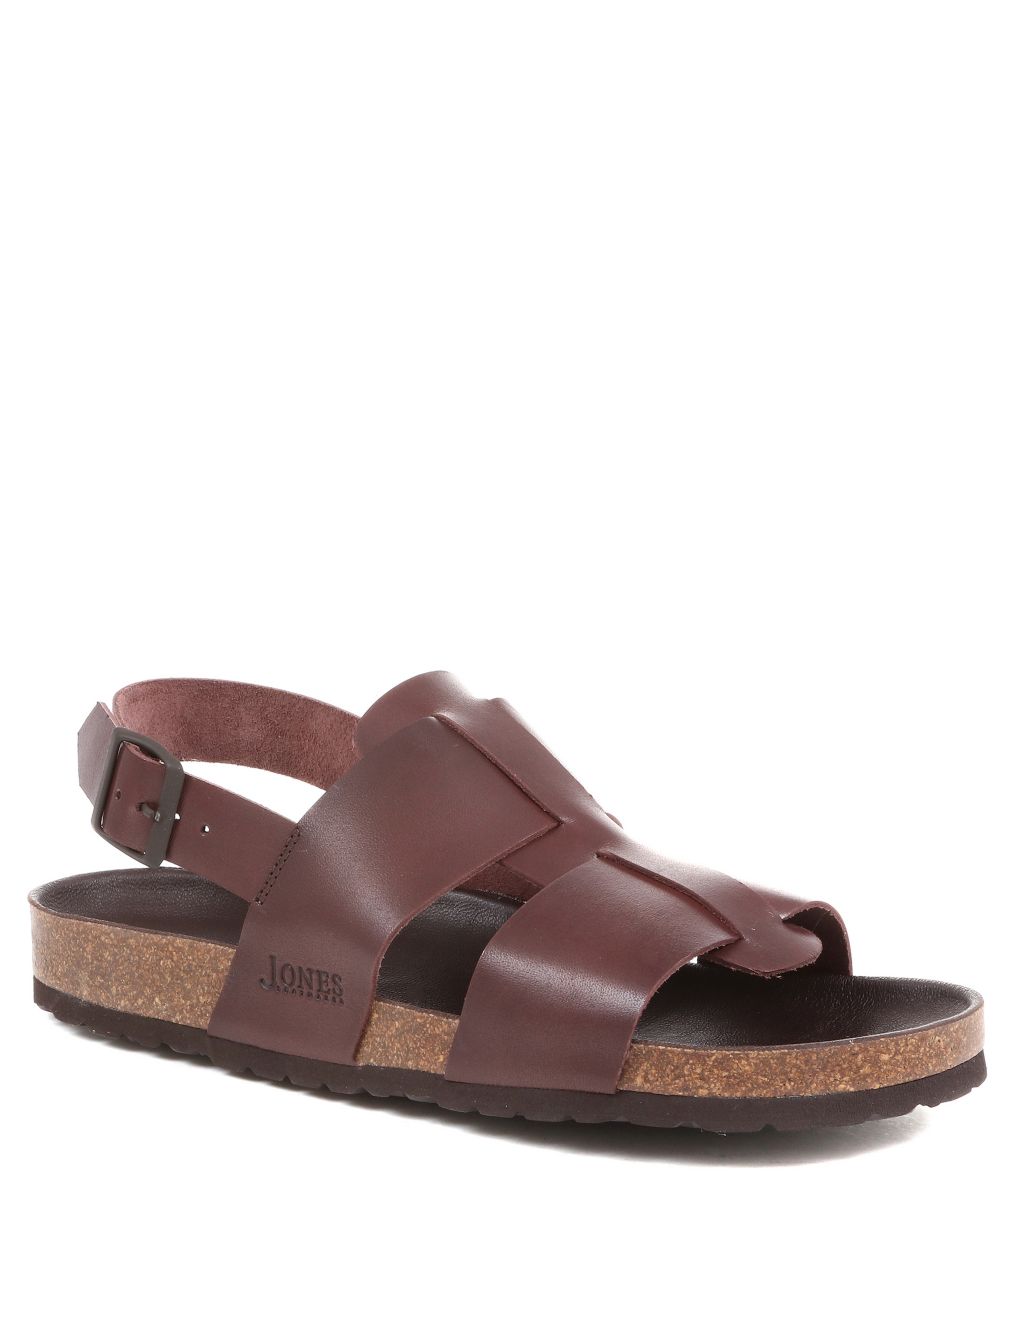 Leather Sandals image 2